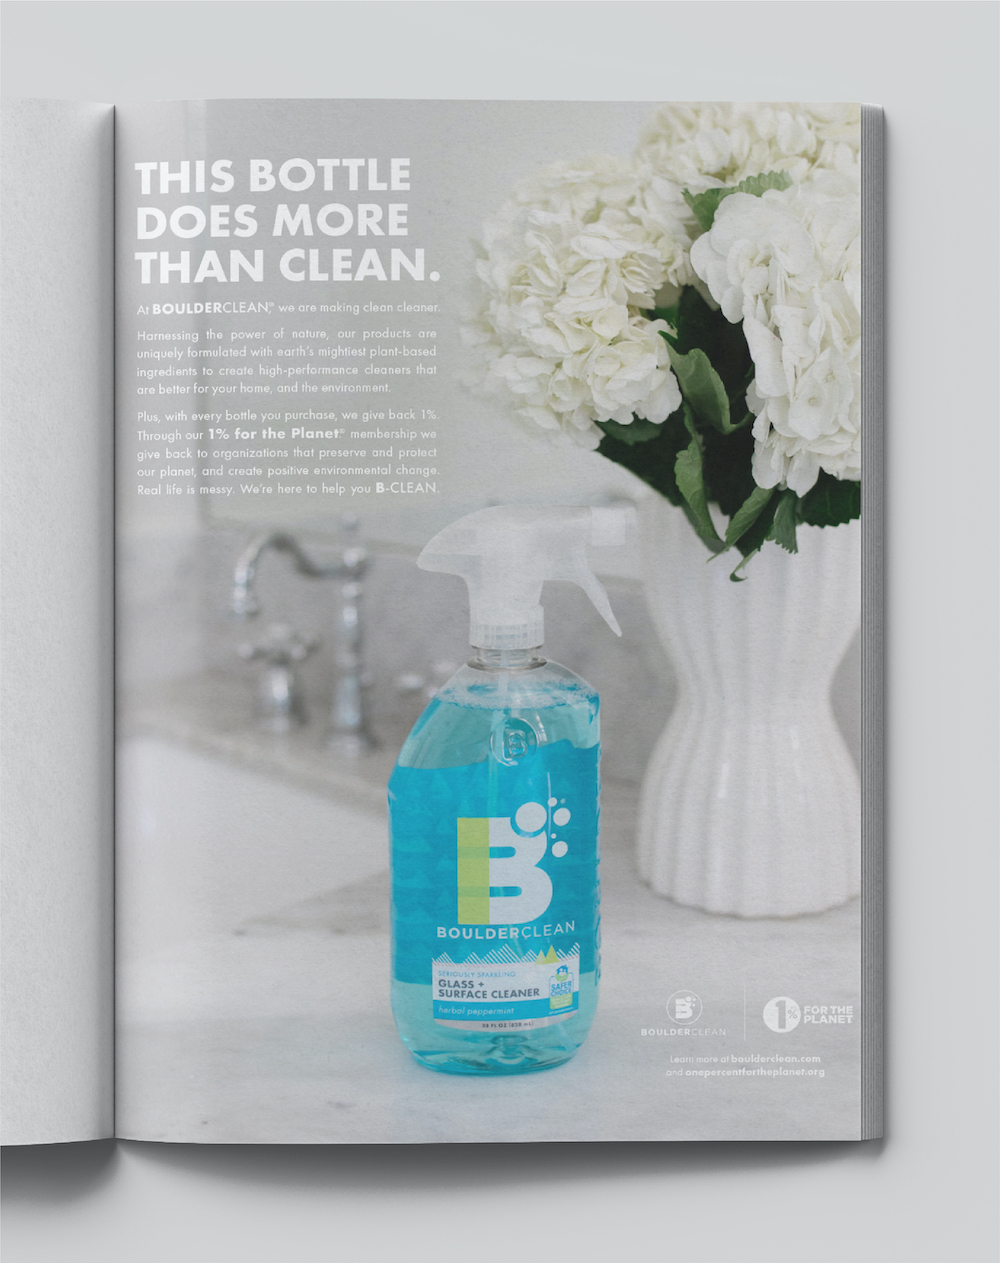 Boulder Clean print advertisement featuring 1% For The Planet partnership.